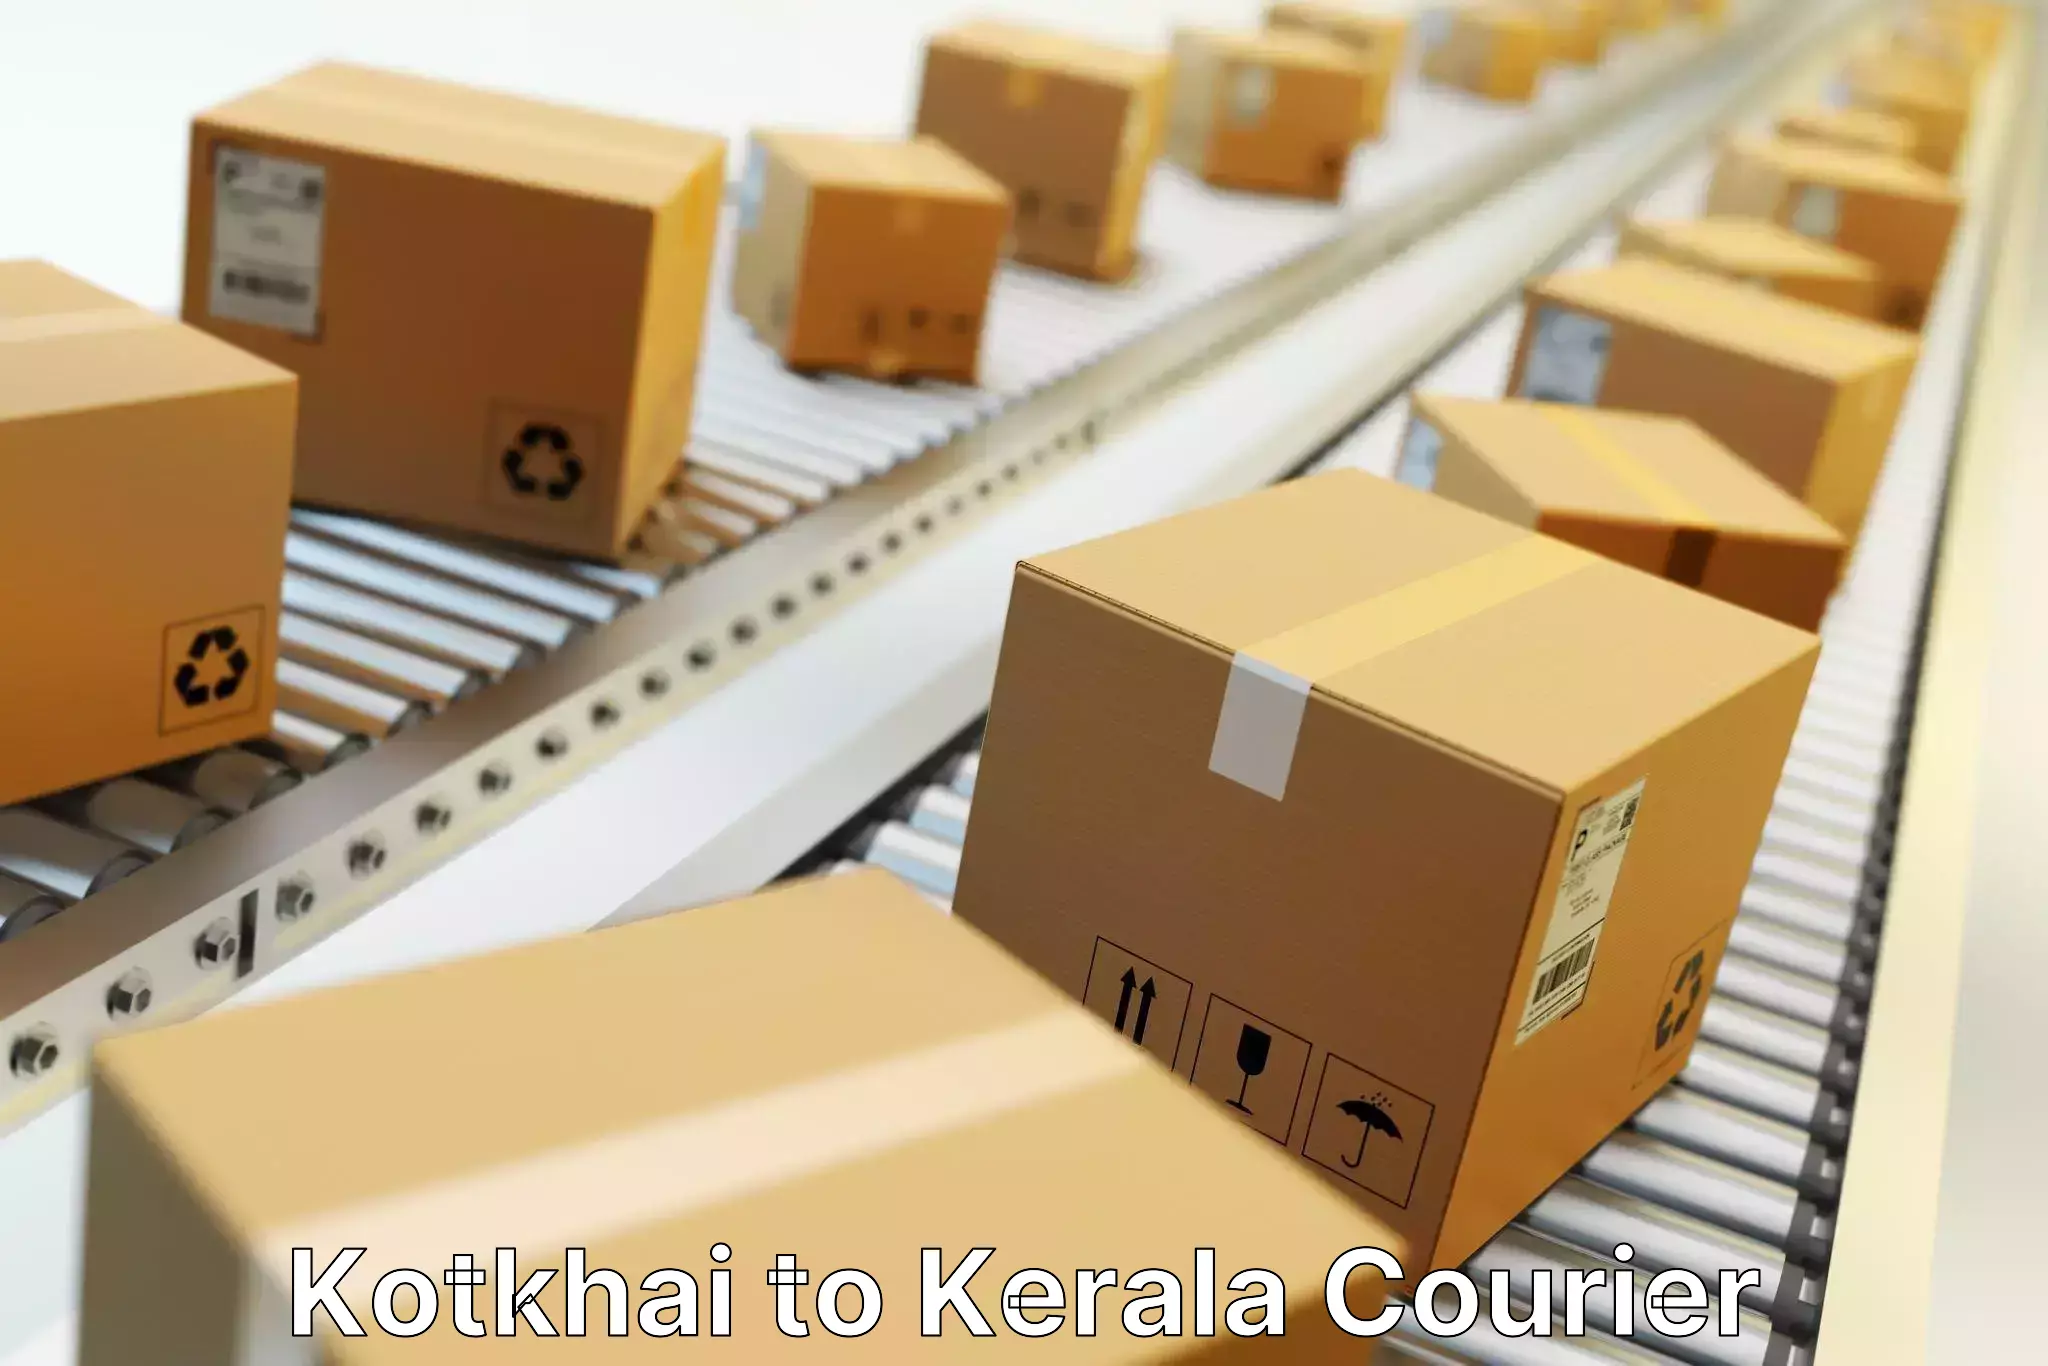 Nationwide shipping capabilities in Kotkhai to Trivandrum